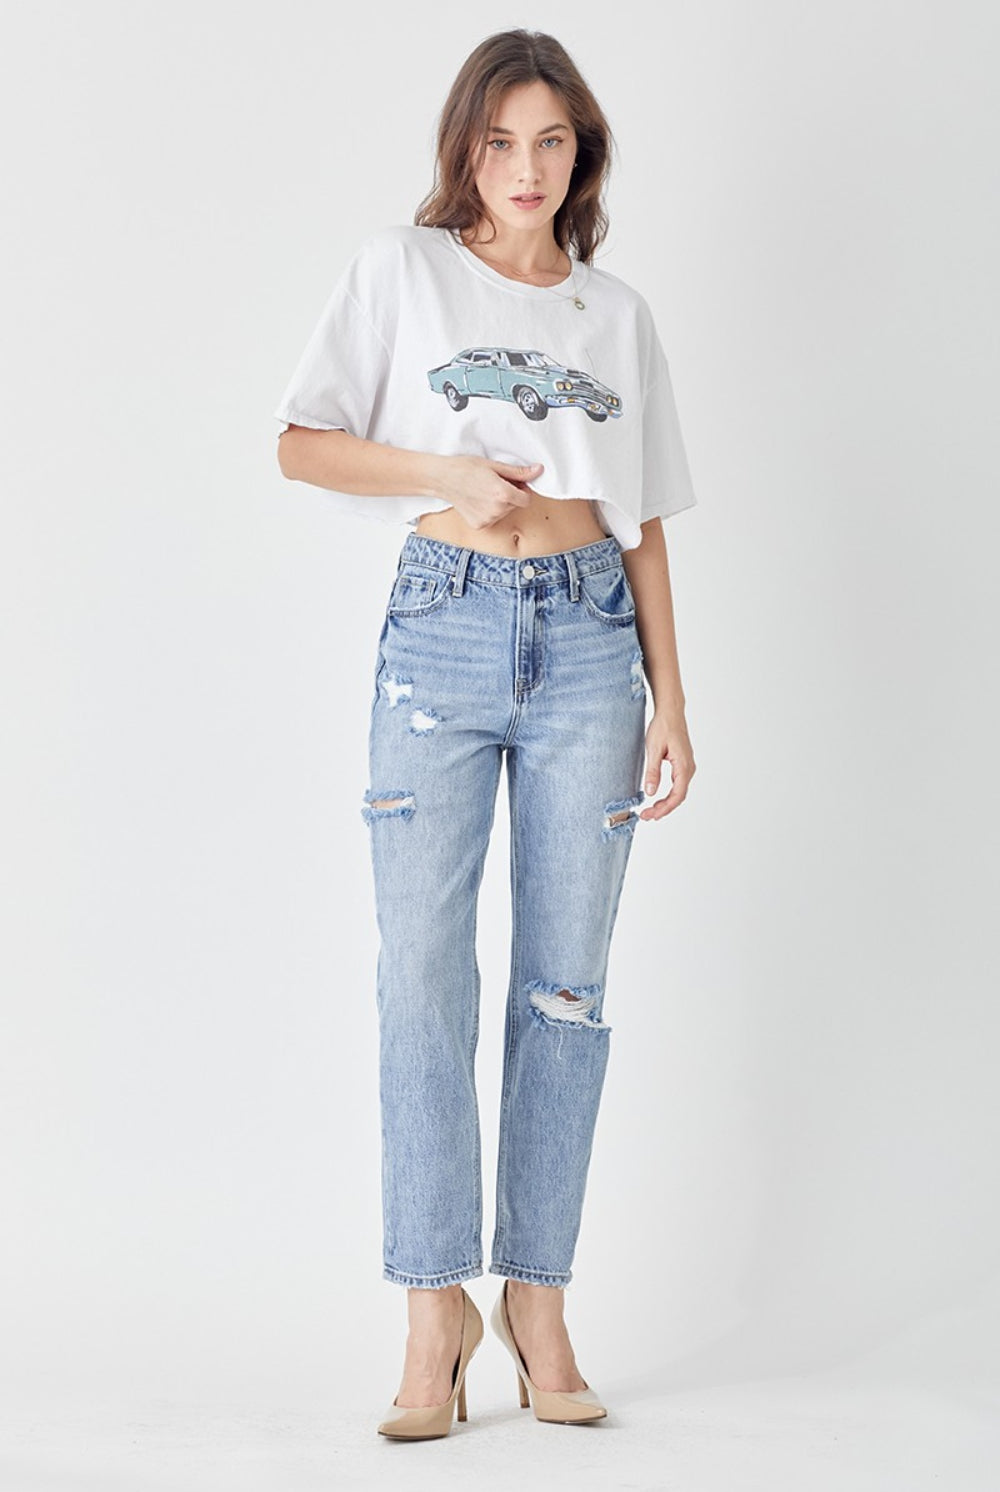 Woman wearing slim cropped distressed blue jeans, perfect for casual chic sty